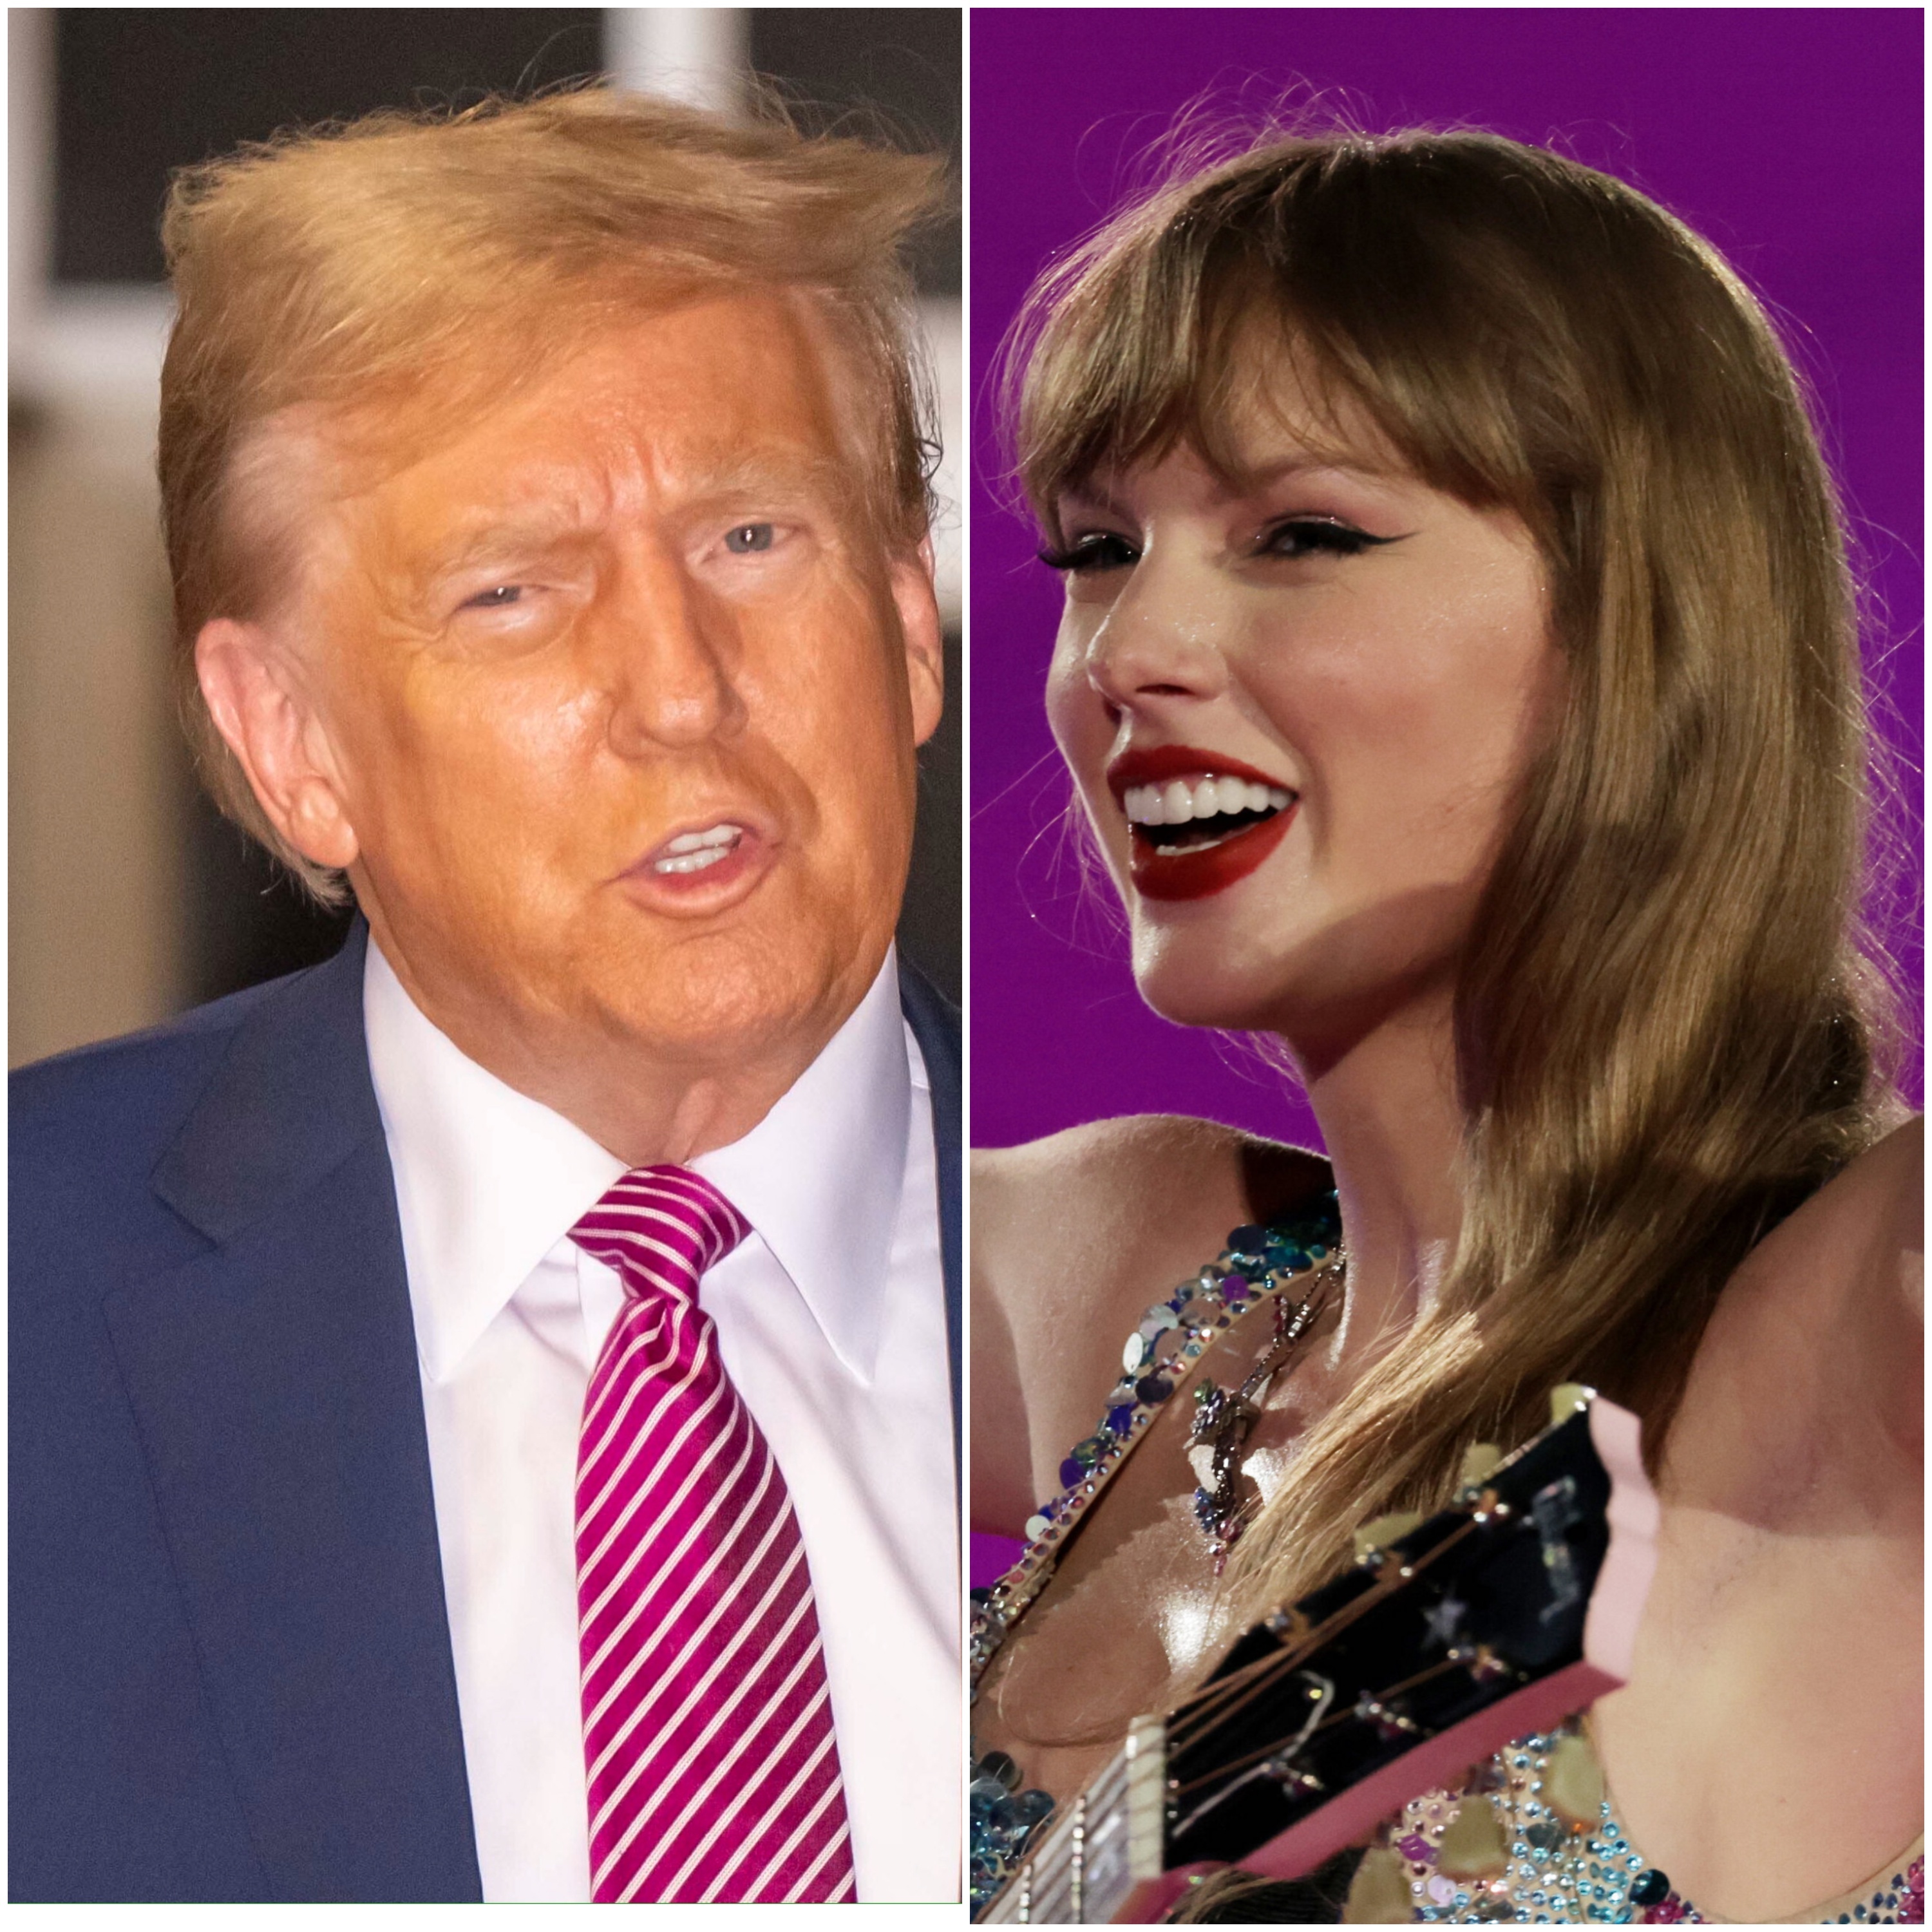 jen psaki taunts donald trump with sly taylor swift-inspired graphic